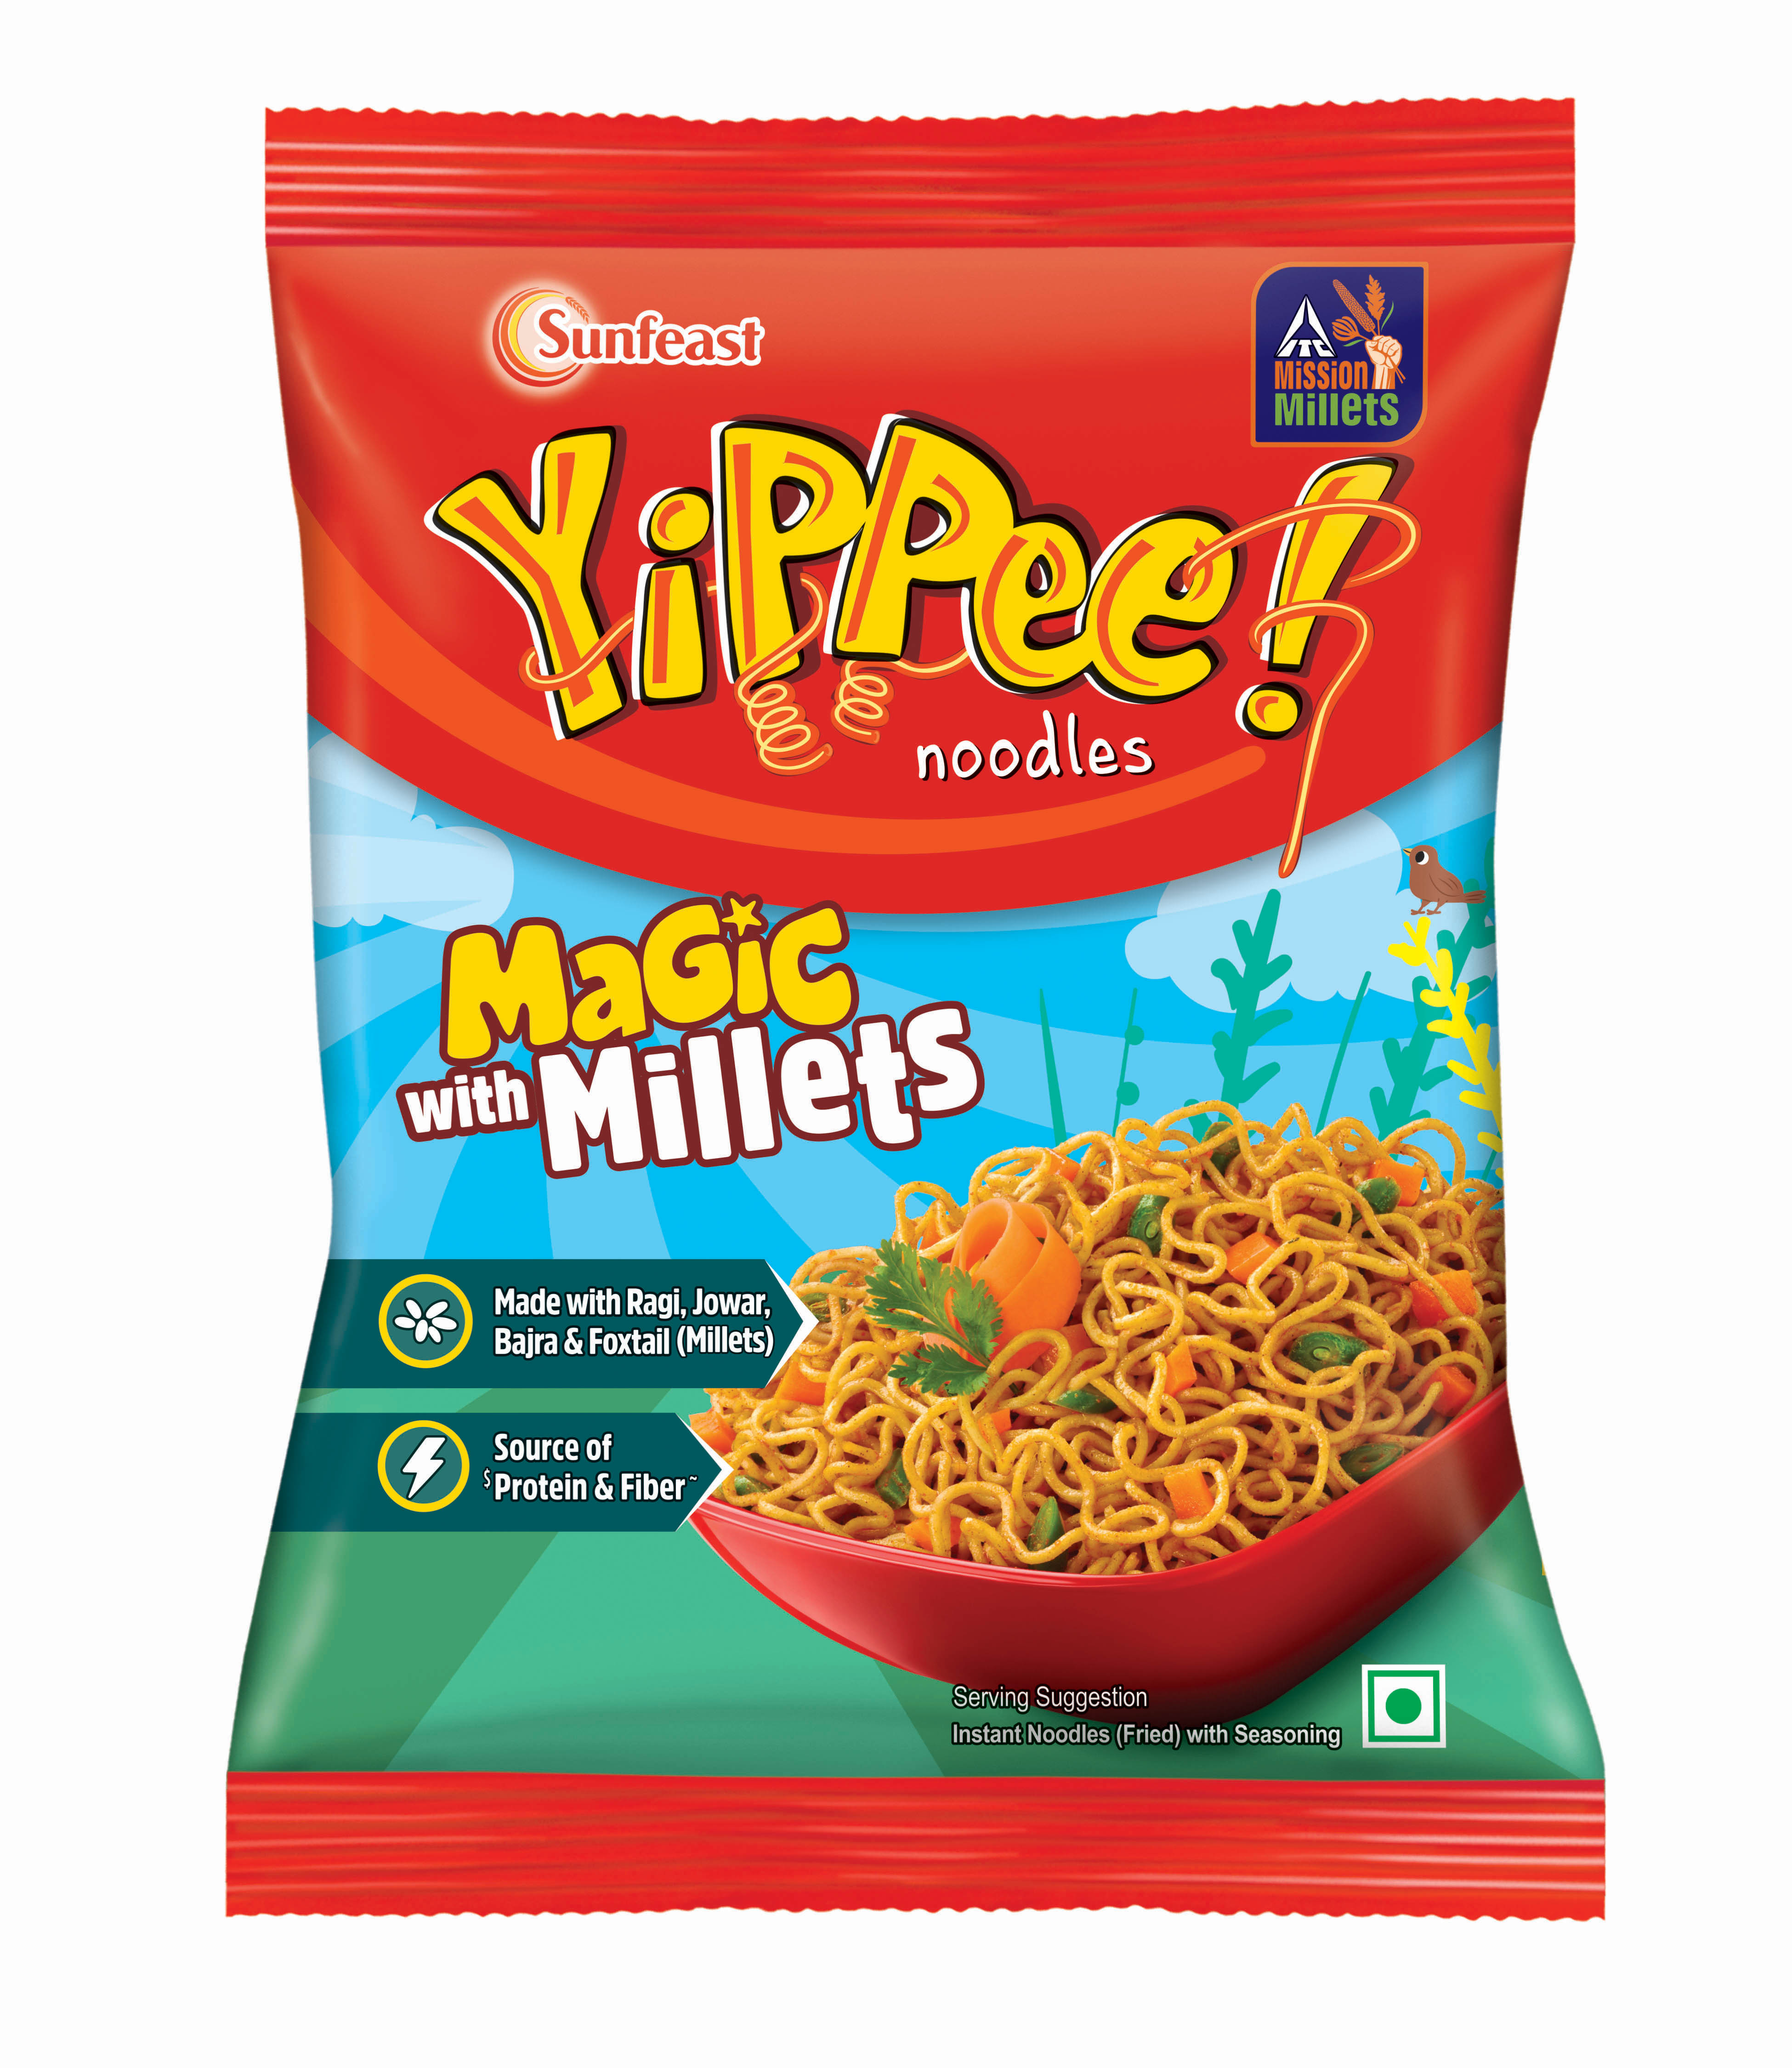 YiPPee! Noodles - Magic with Millets